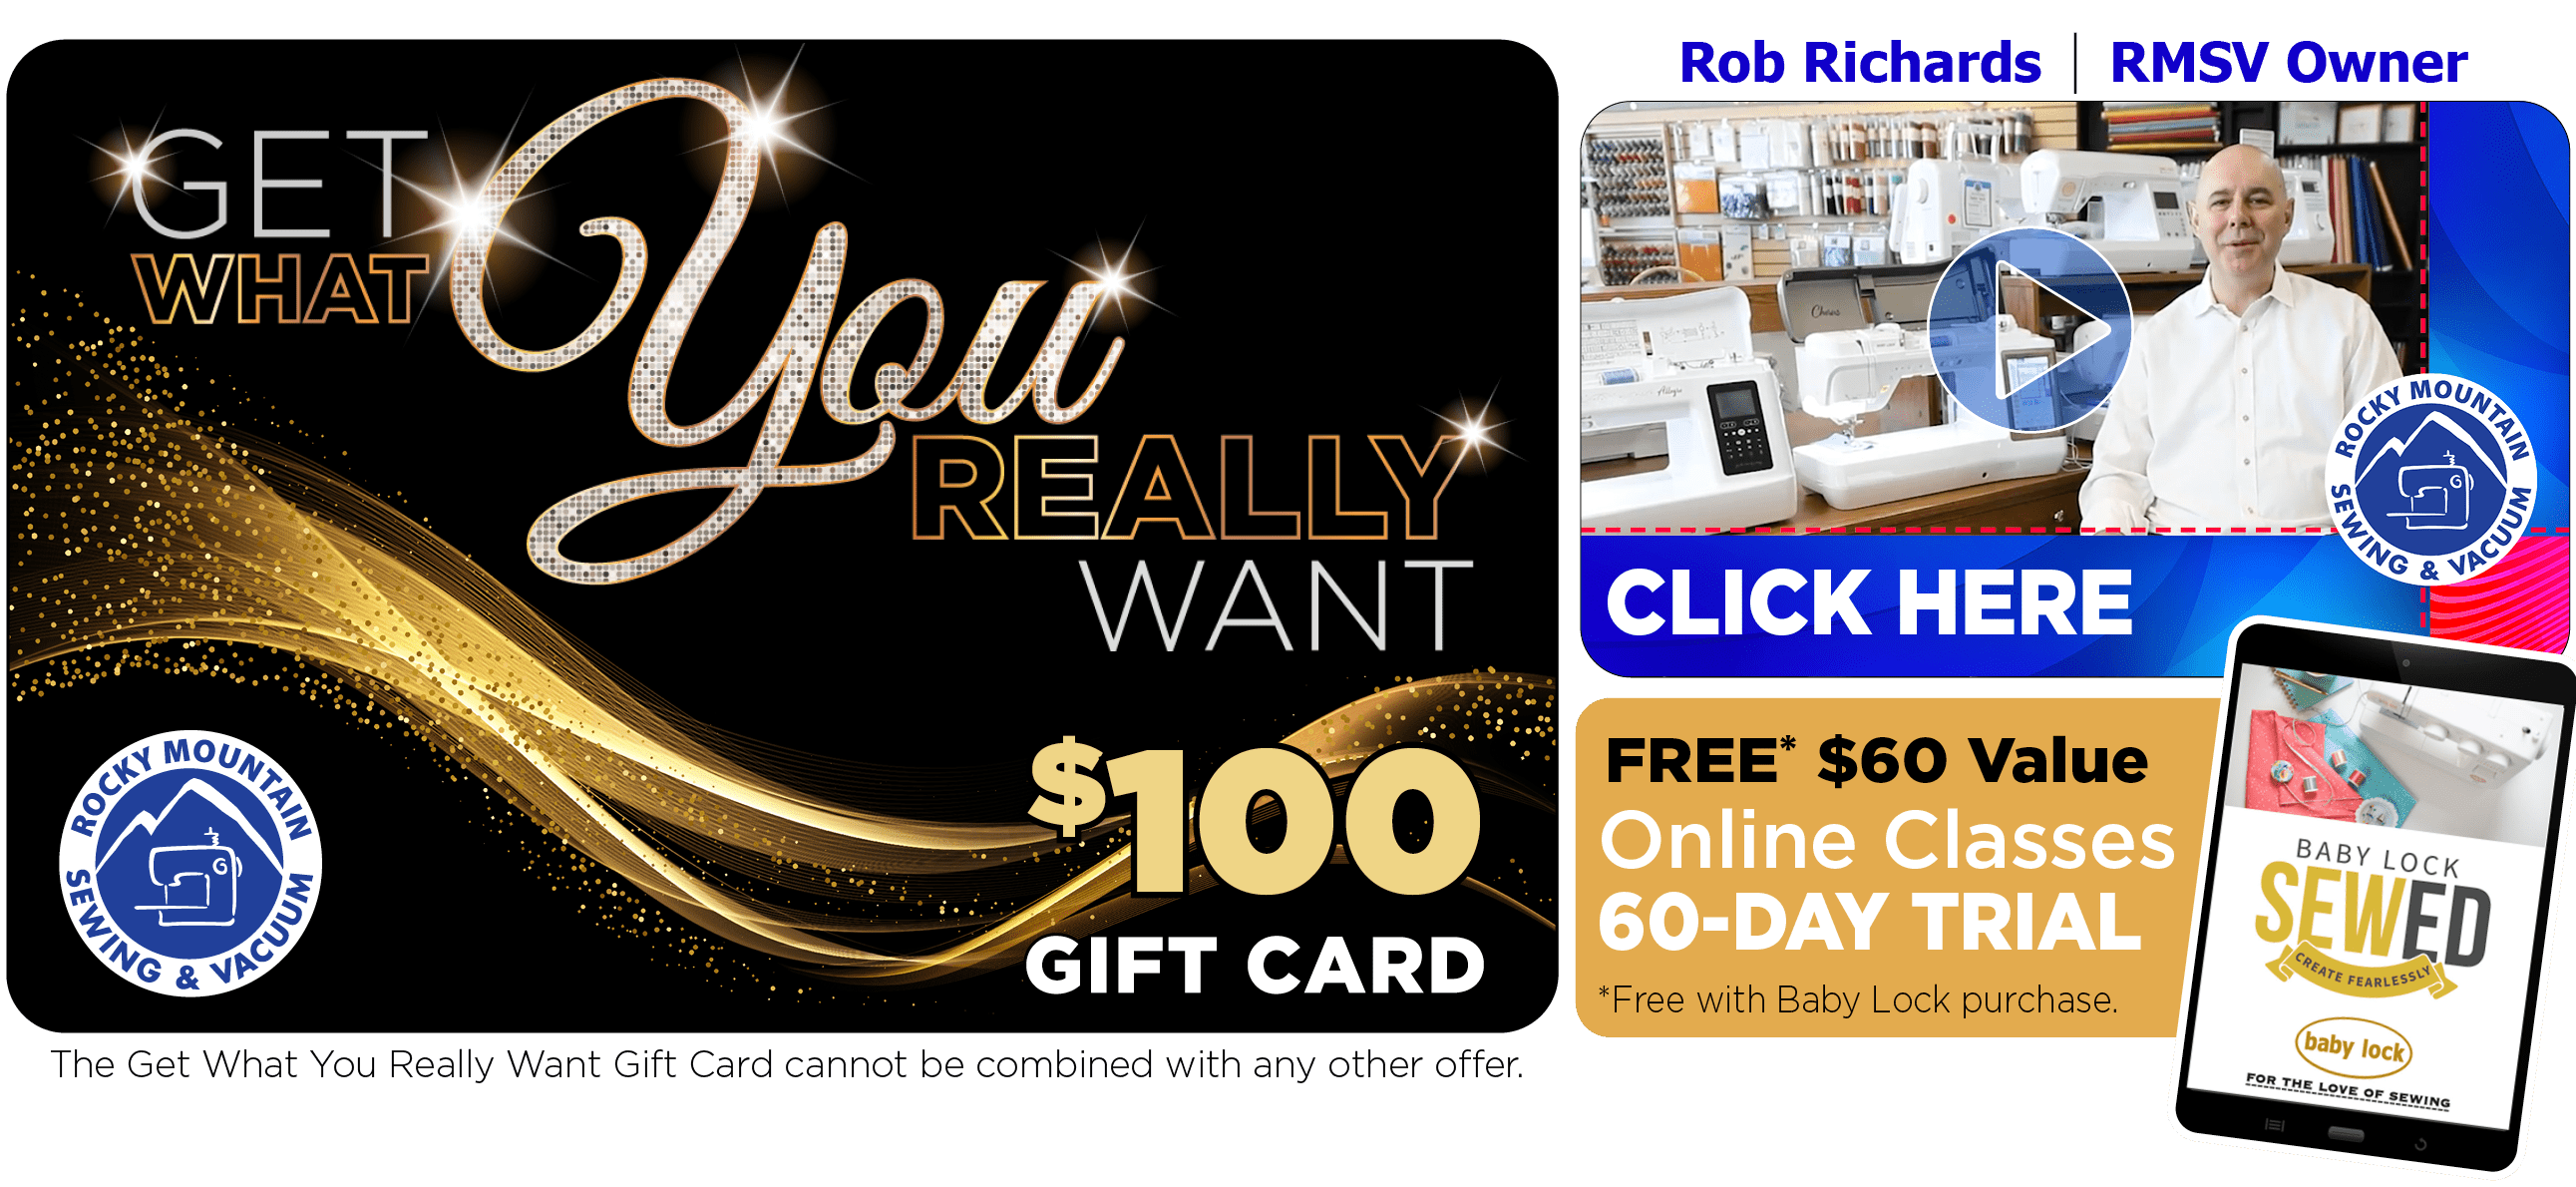 Get What You Really Want $100 Gift Card with Purchase